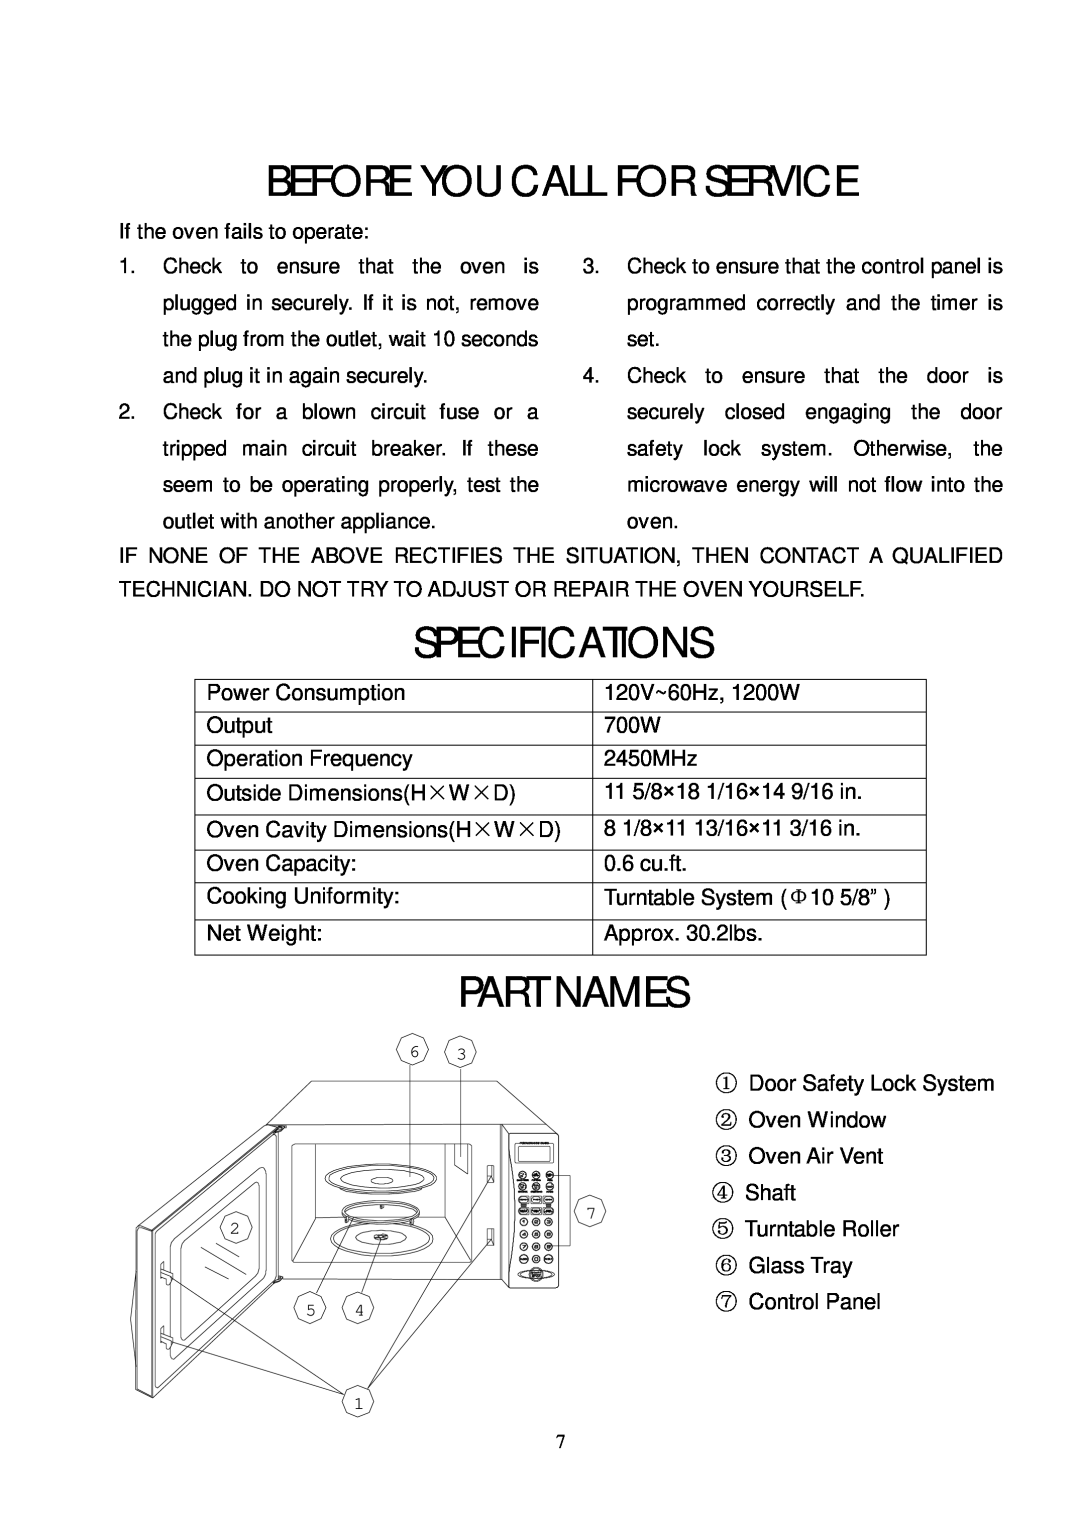 Sunbeam SMW700 owner manual Before You Call For Service, Specifications, Part Names, ⑦ Control Panel 